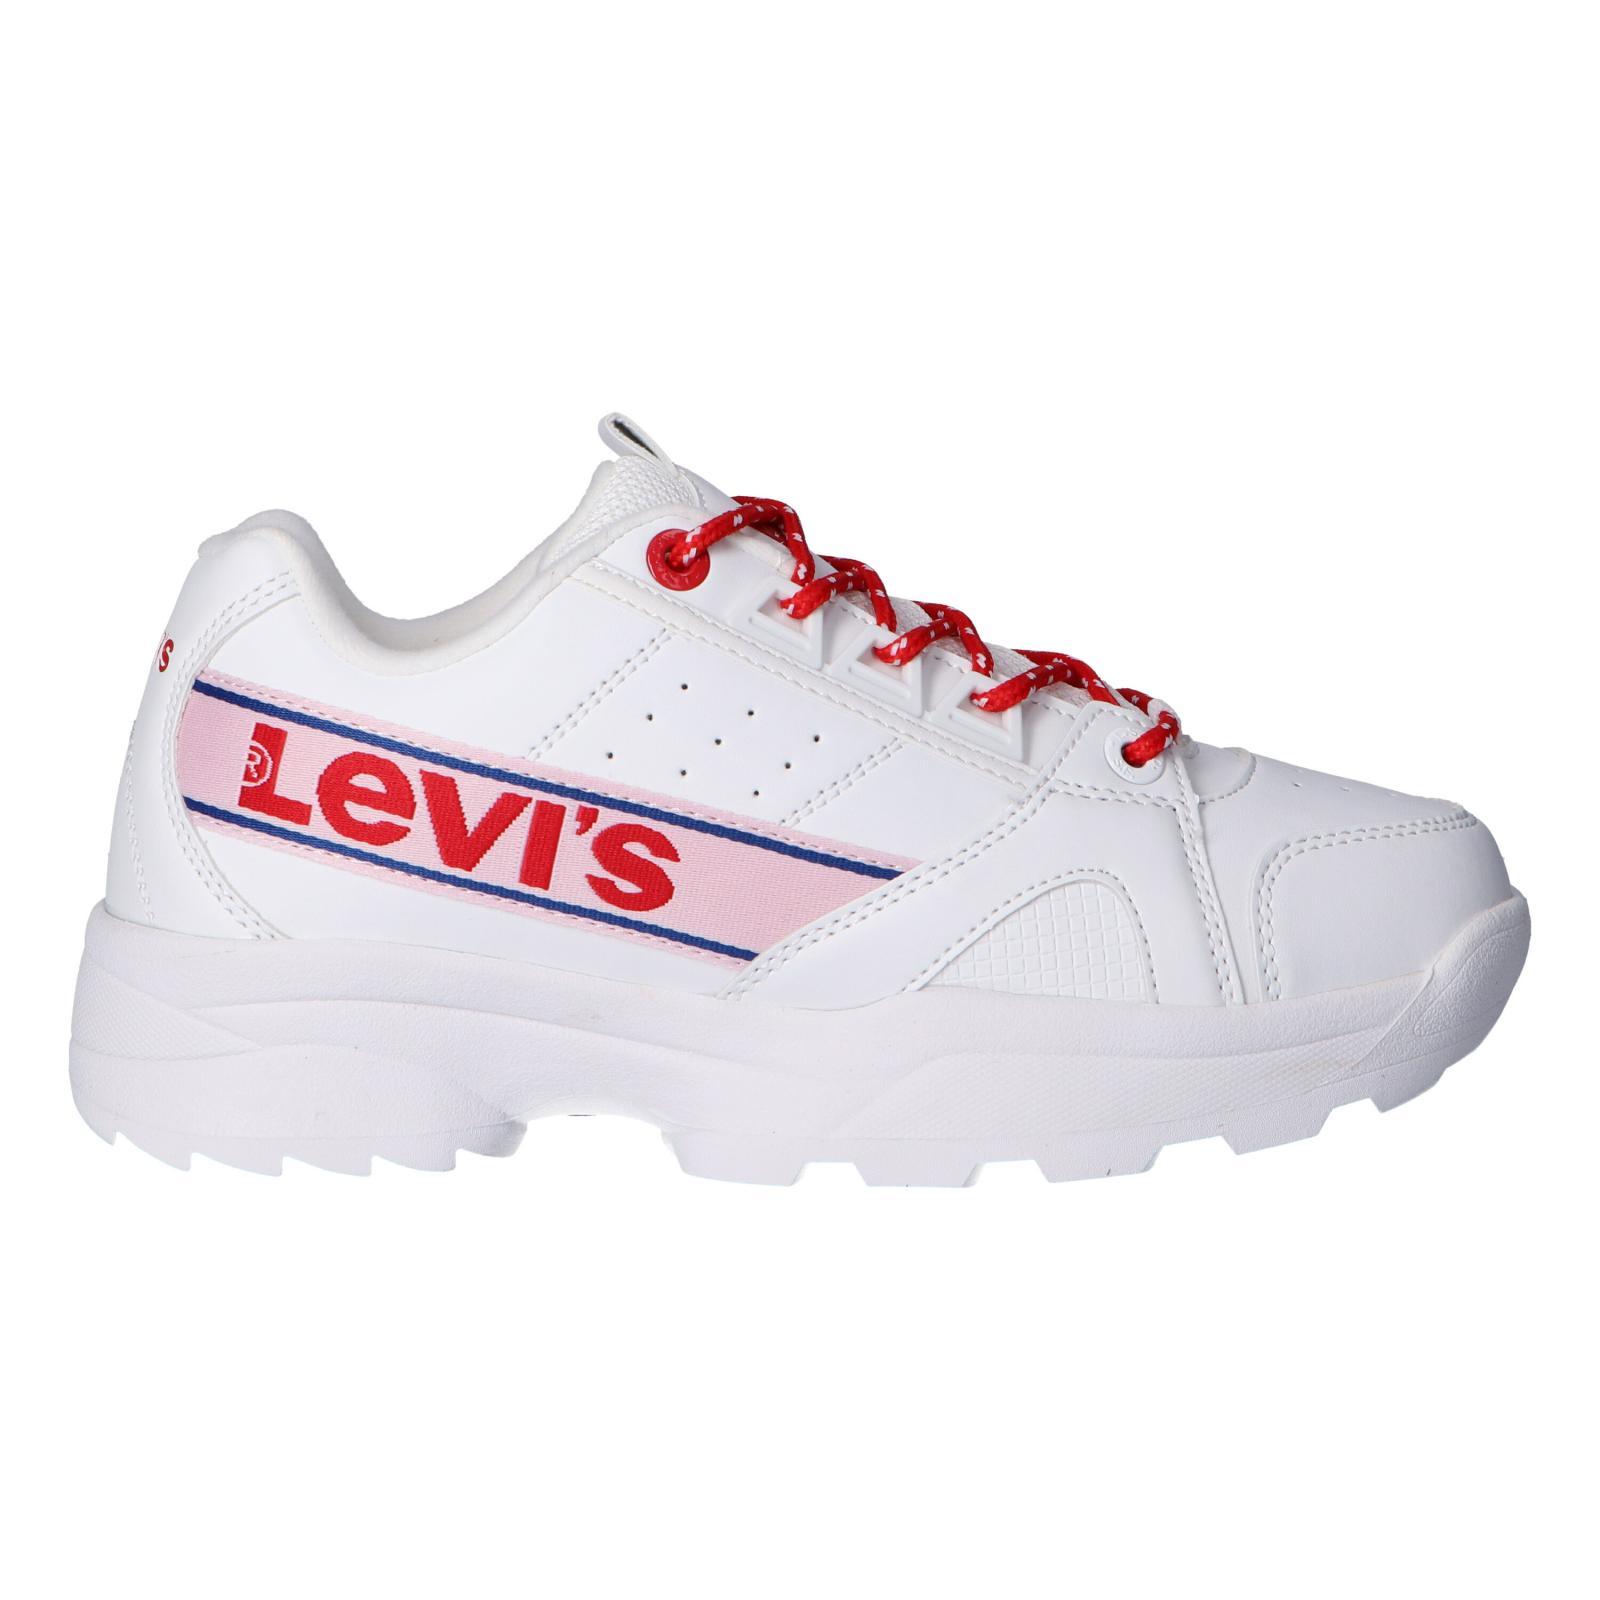 Sports shoes woman LEVIS VSOH0051S SOHO 0079 WHITE RED multibella